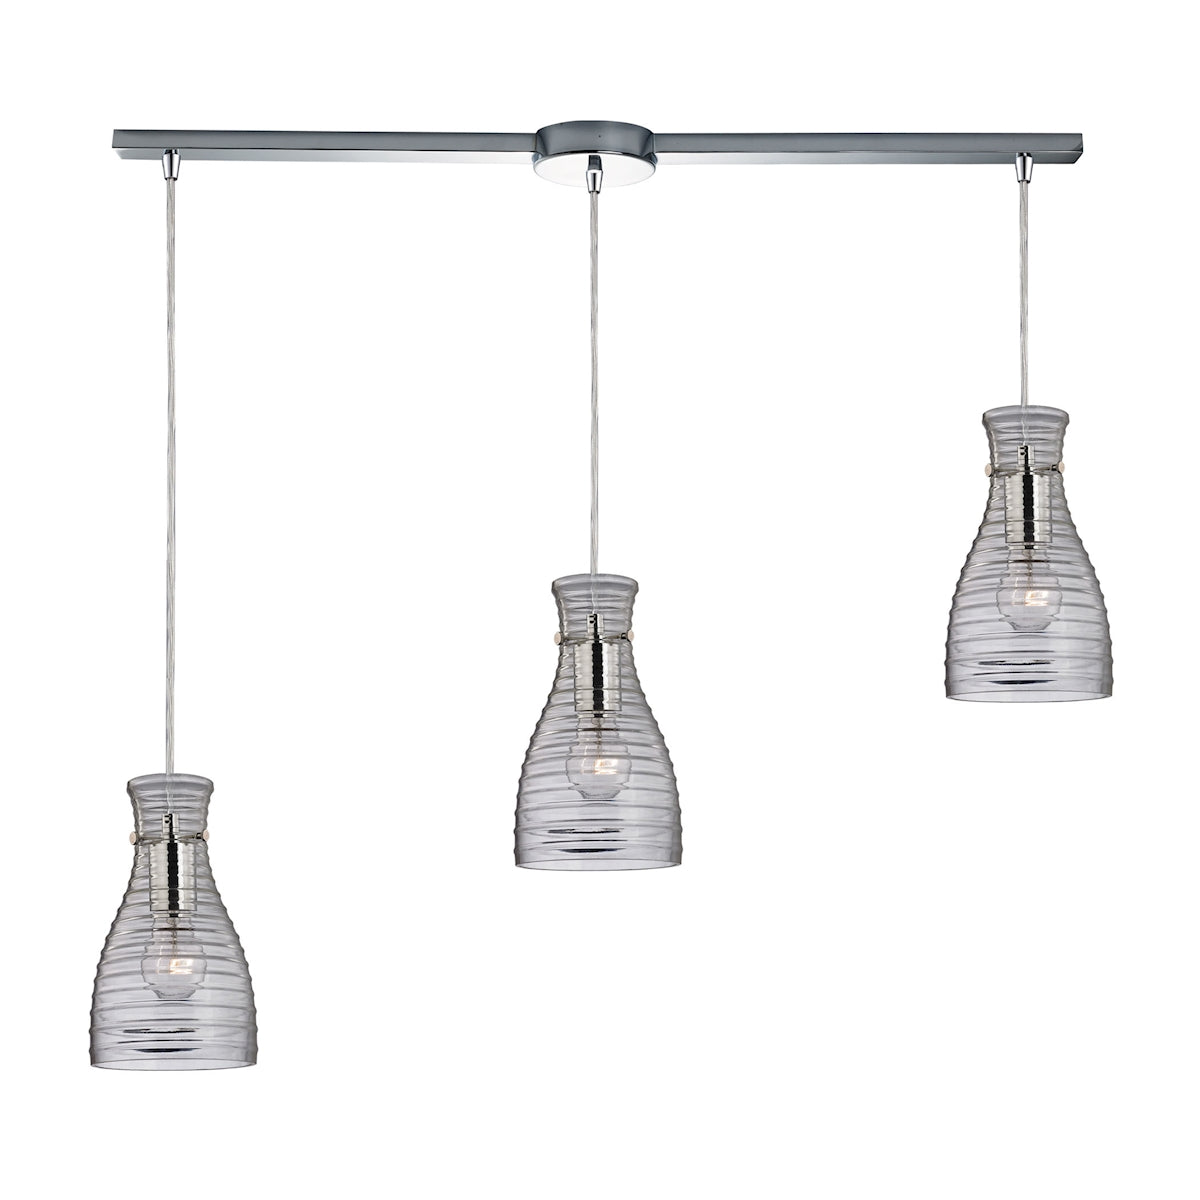 Strata 3-Light Linear Pendant Fixture in Polished Chrome with Ribbed Blown Glass